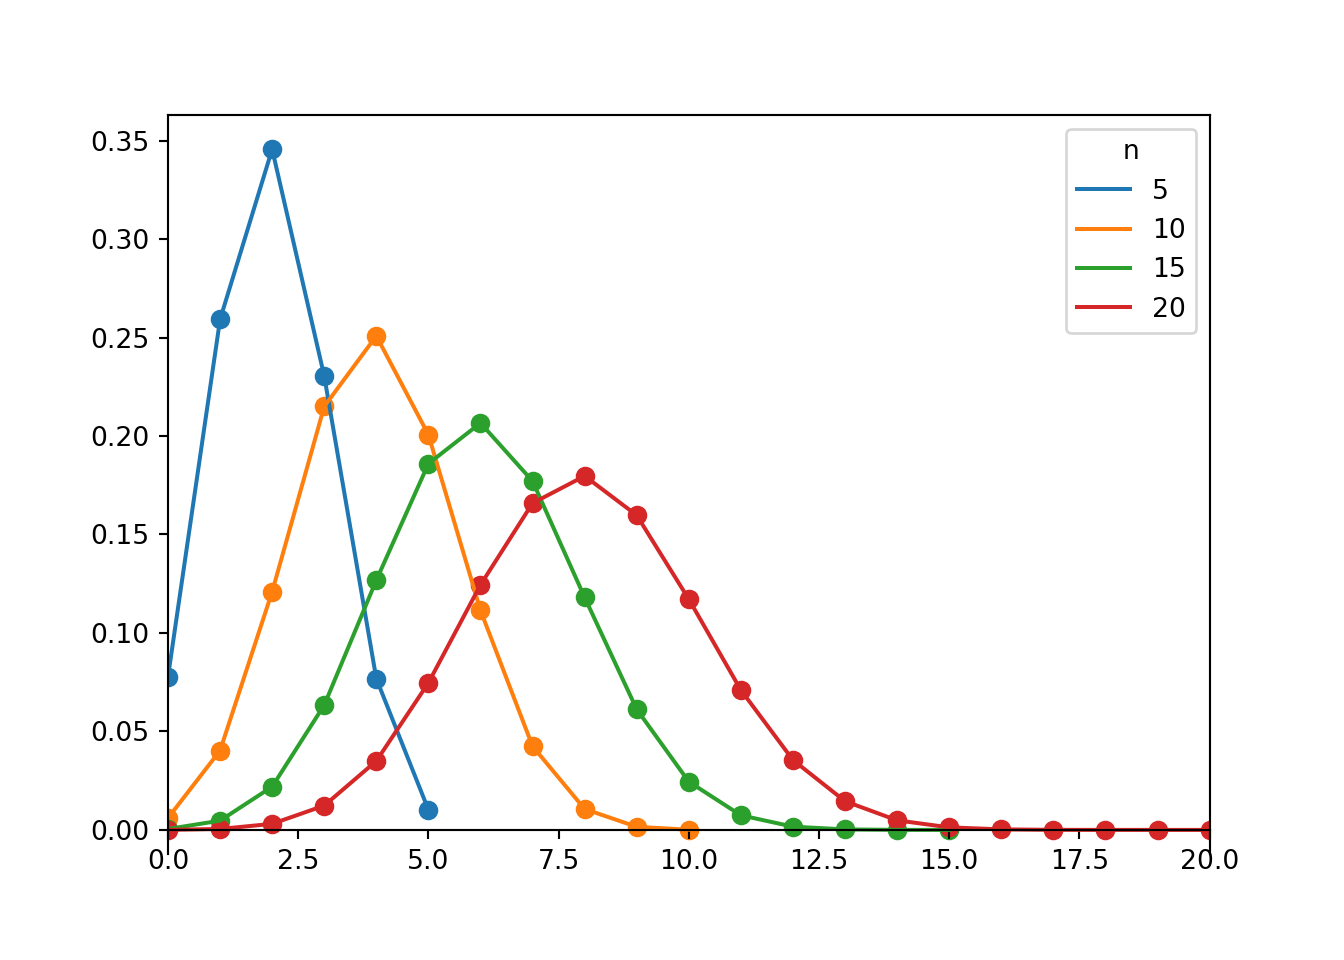 Probability mass functions for Binomial(\(n\), 0.4) distributions for \(n = 5, 10, 15, 20\).